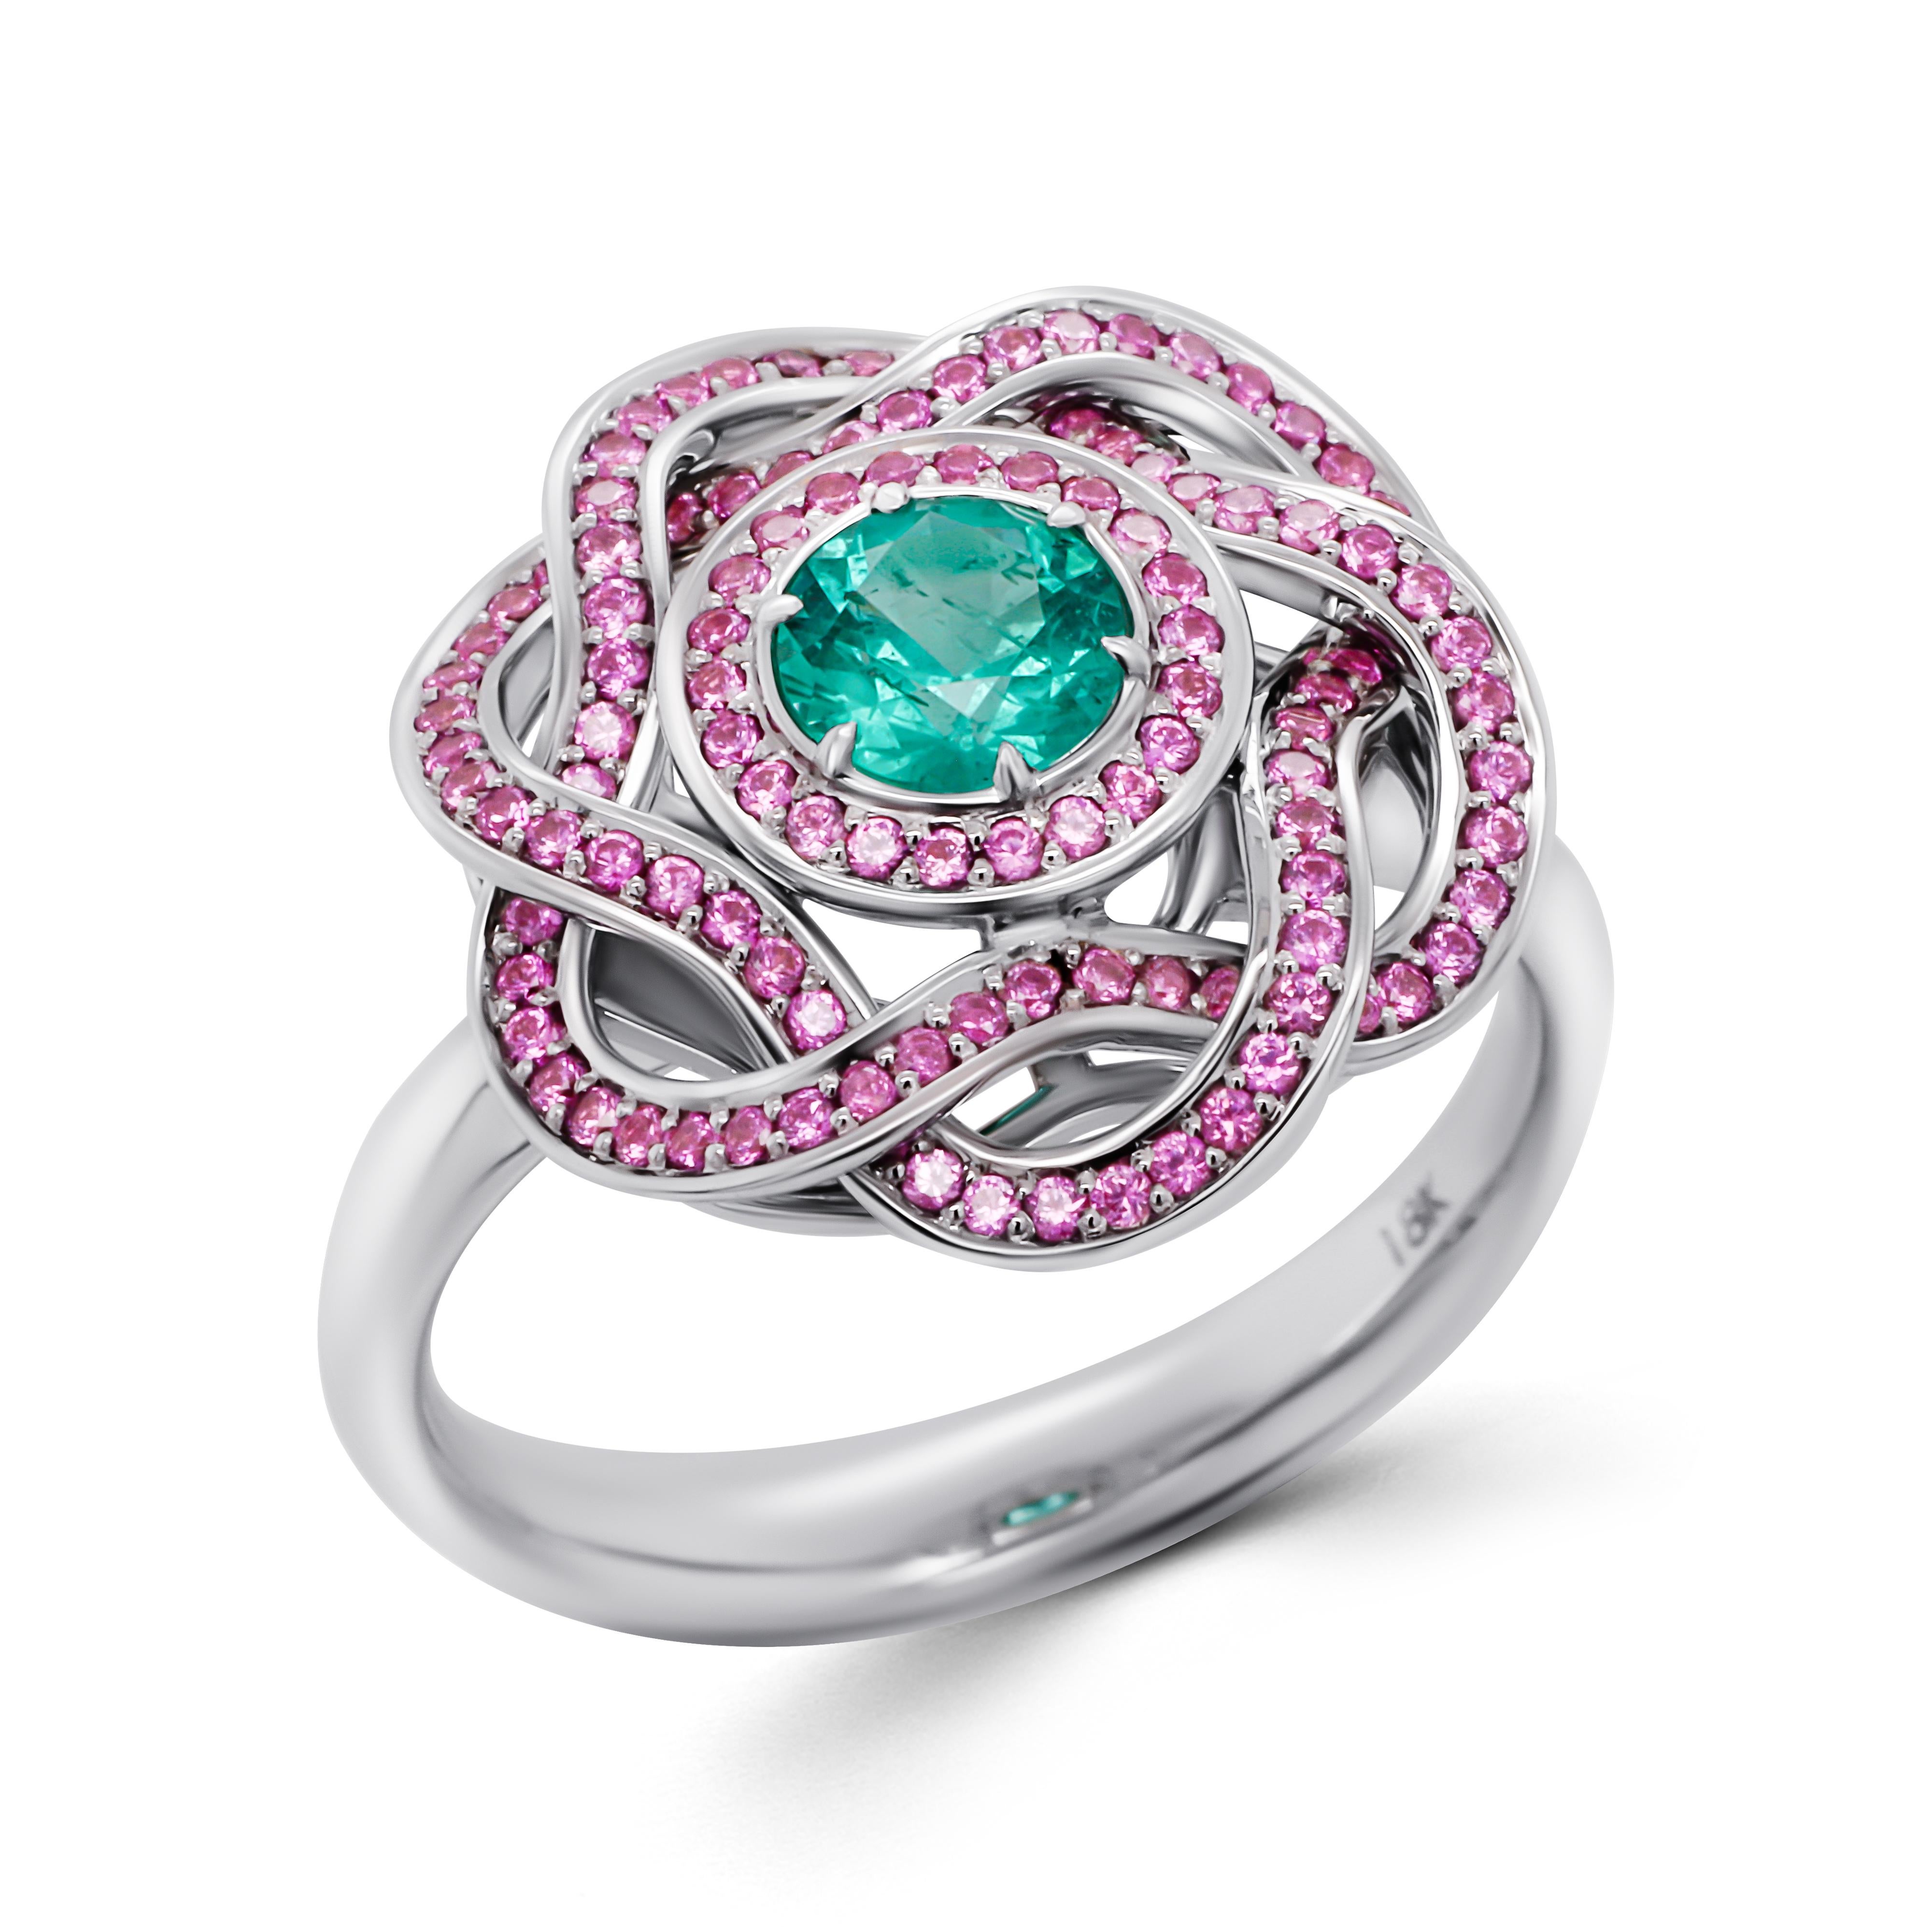 An elegant floral design inspired by late motifs of XIX century. 
Flower's leaves are embodied in sophisticated intertwined lines adorned with Pink Sapphires represent a multi-level structure. The untreated round-cut Russian Emerald in significant